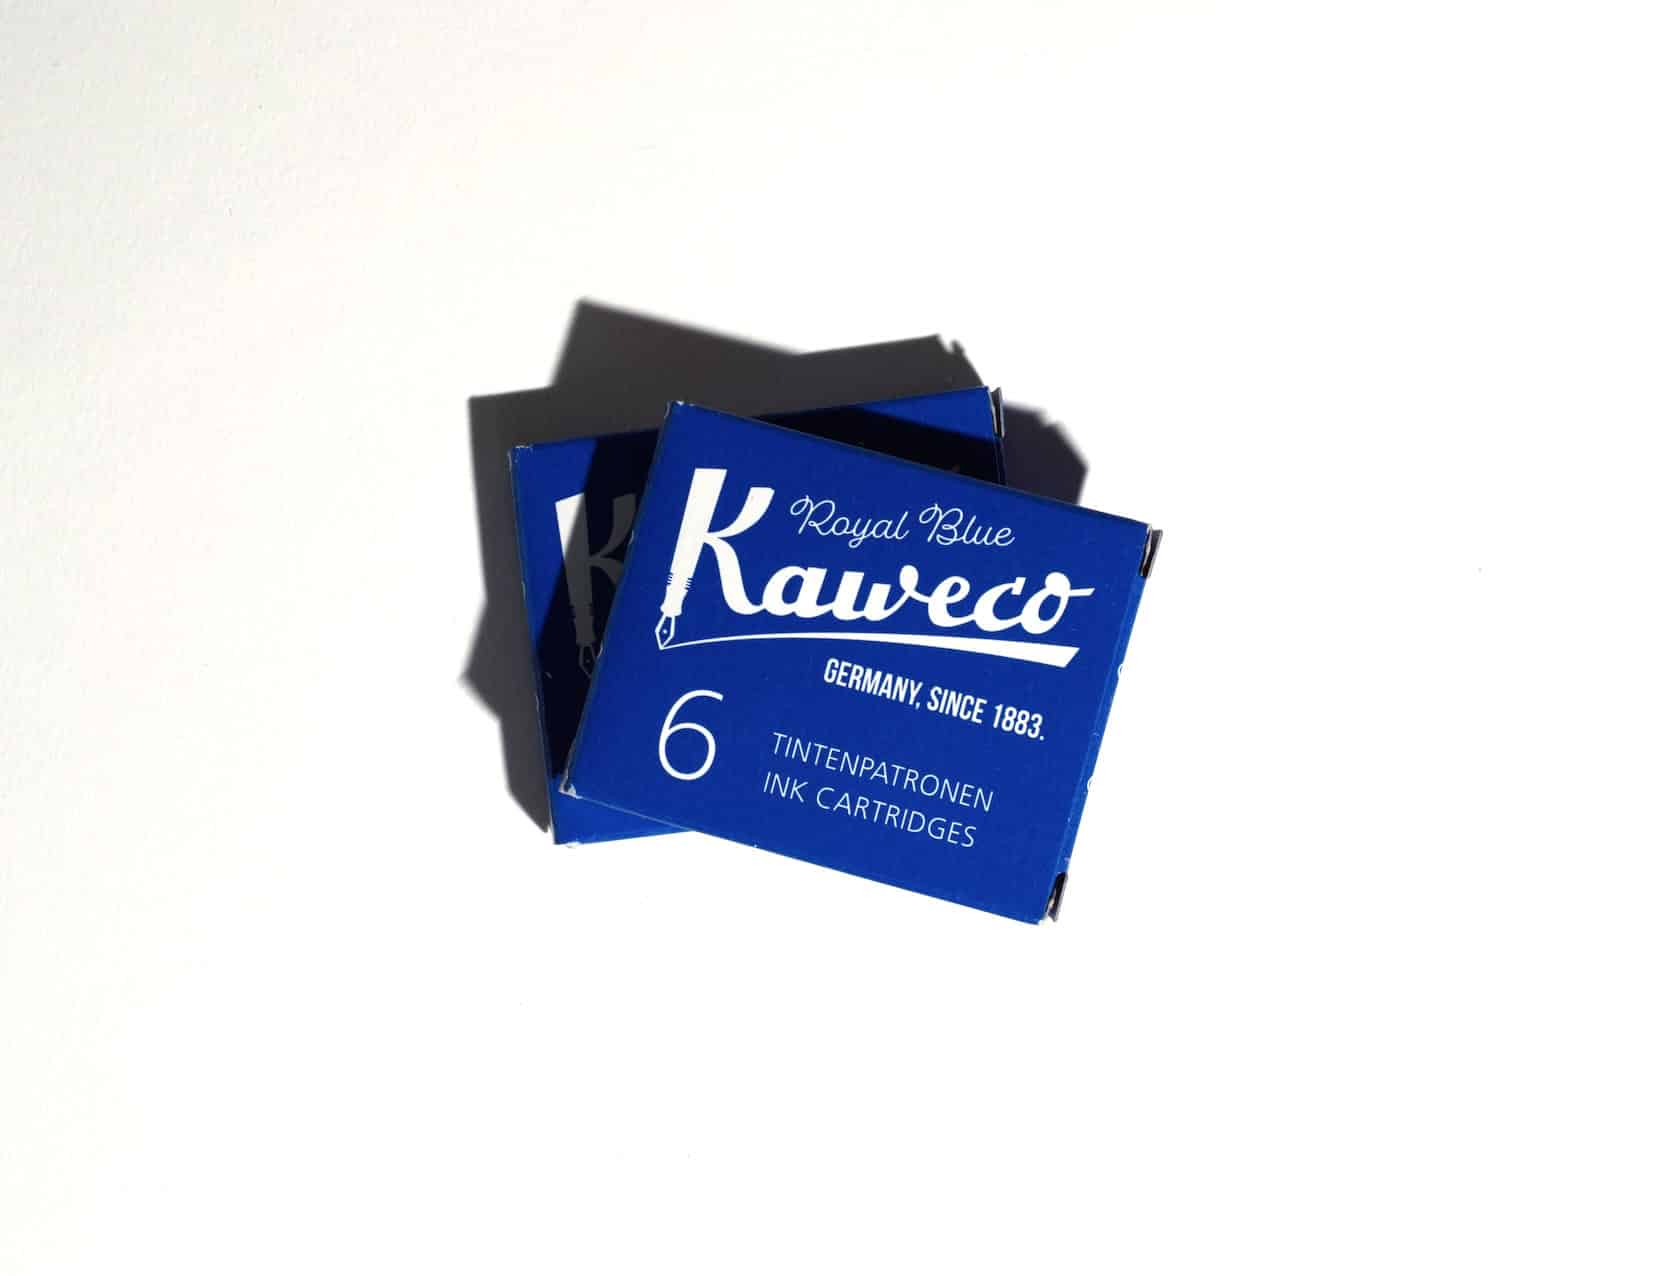 Two boxes of ink cartridges lie on a white surface. Text on packaging reads: Kaweco. Royal Blue. Germany, since 1883. 6 Tintenpatronen. Ink Cartridges.